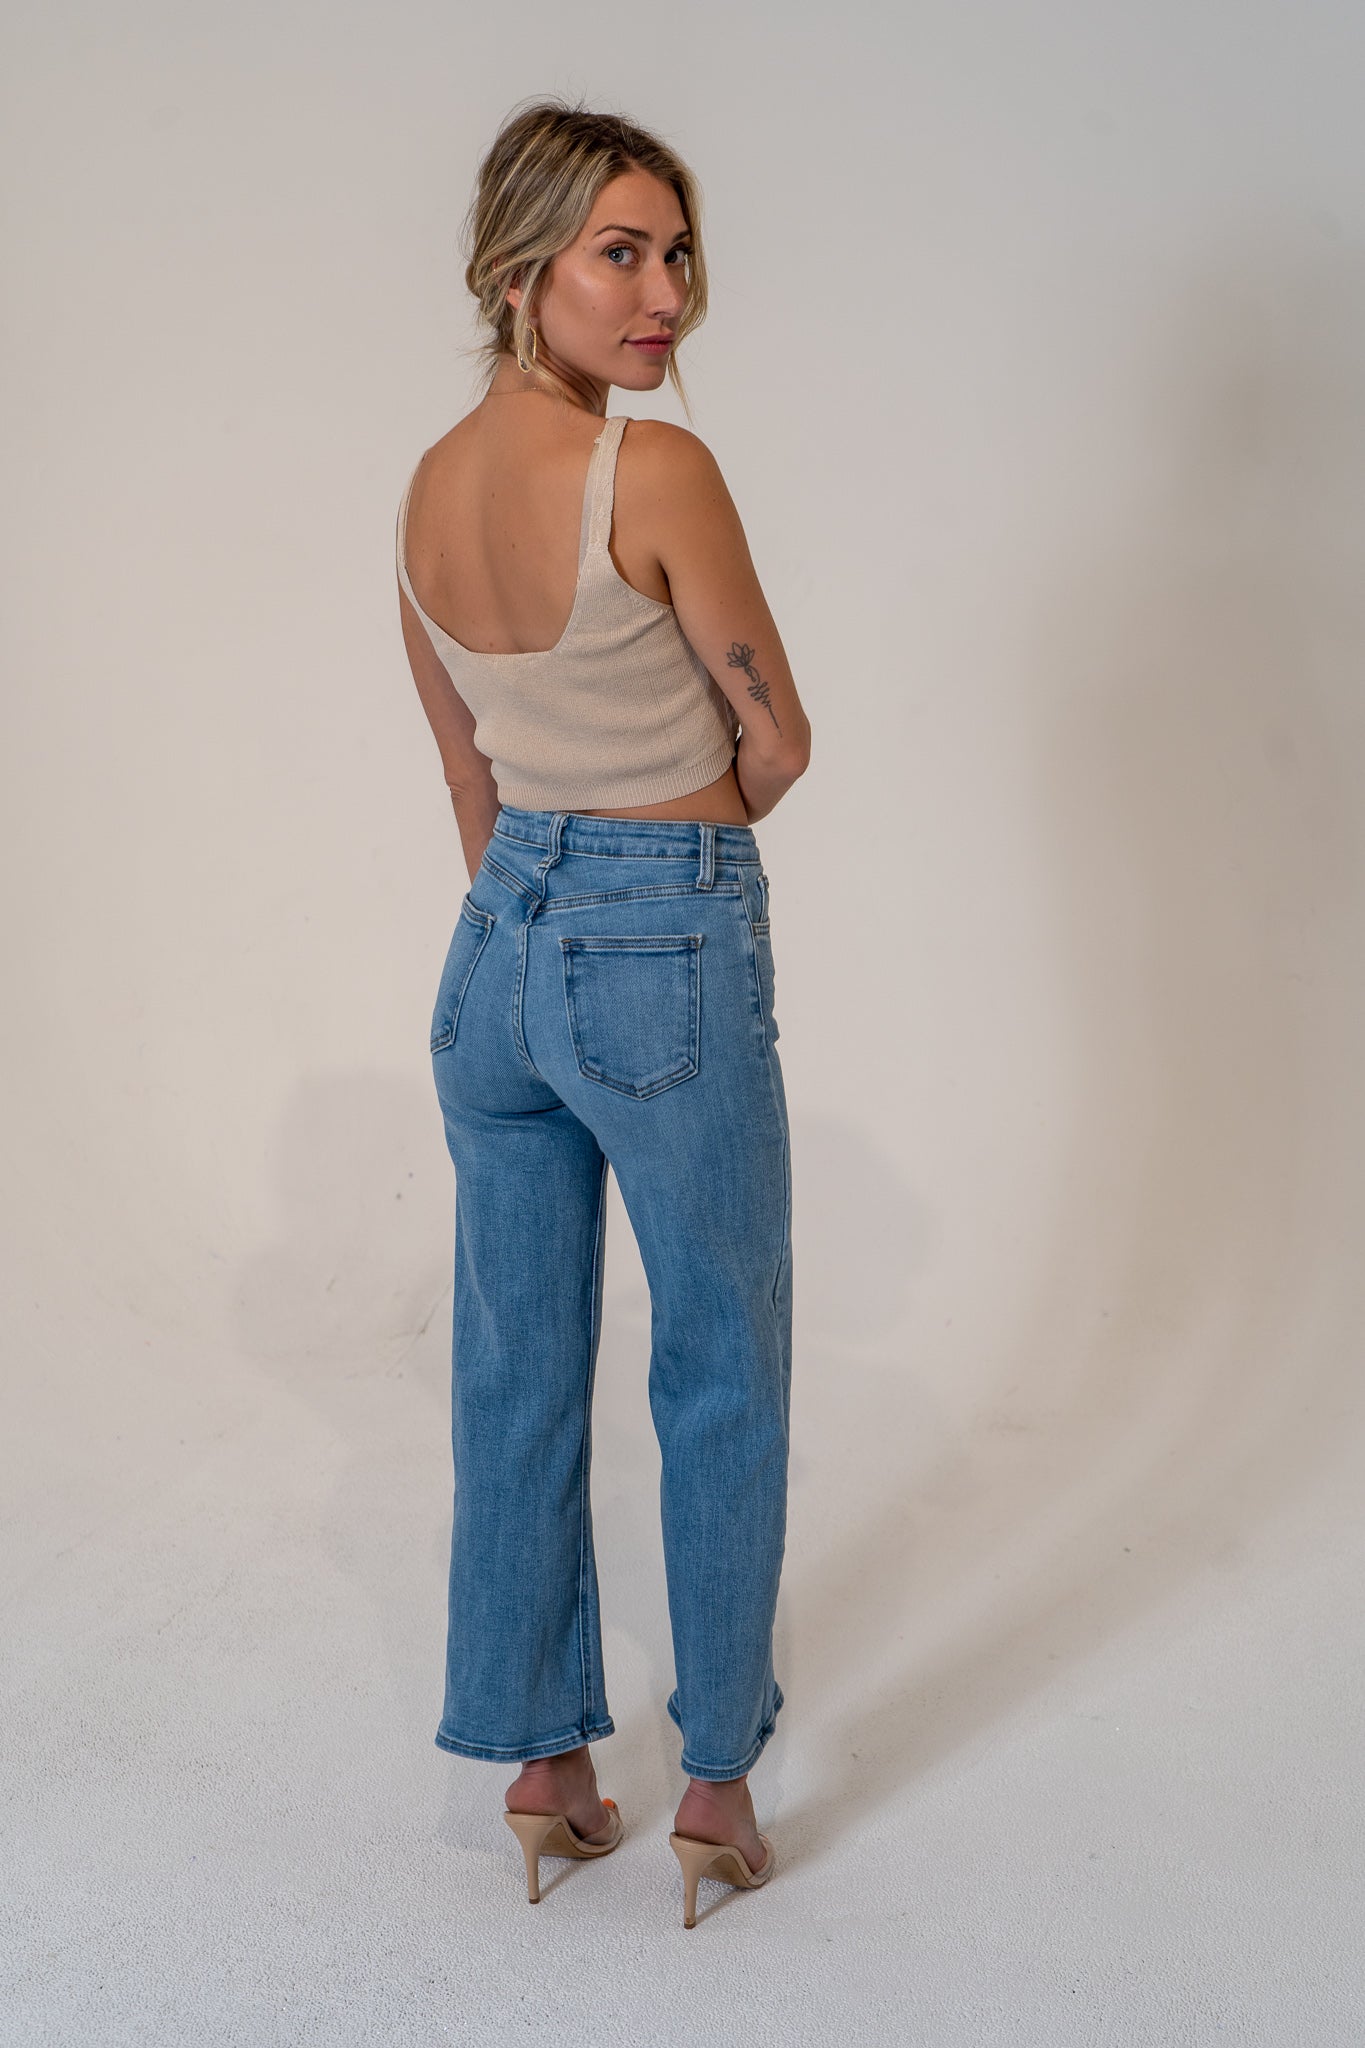 Designed for you with thoughtful construction, precise fitting and quality fabric. Slowly widens from waist to bottom, hugs your tush in all the right ways and is a staple for a polished and stylish wardrobe. Fit for the office, the beach, the market or a night out- the Nexus is your next favorite staple.   Medium Denim. 